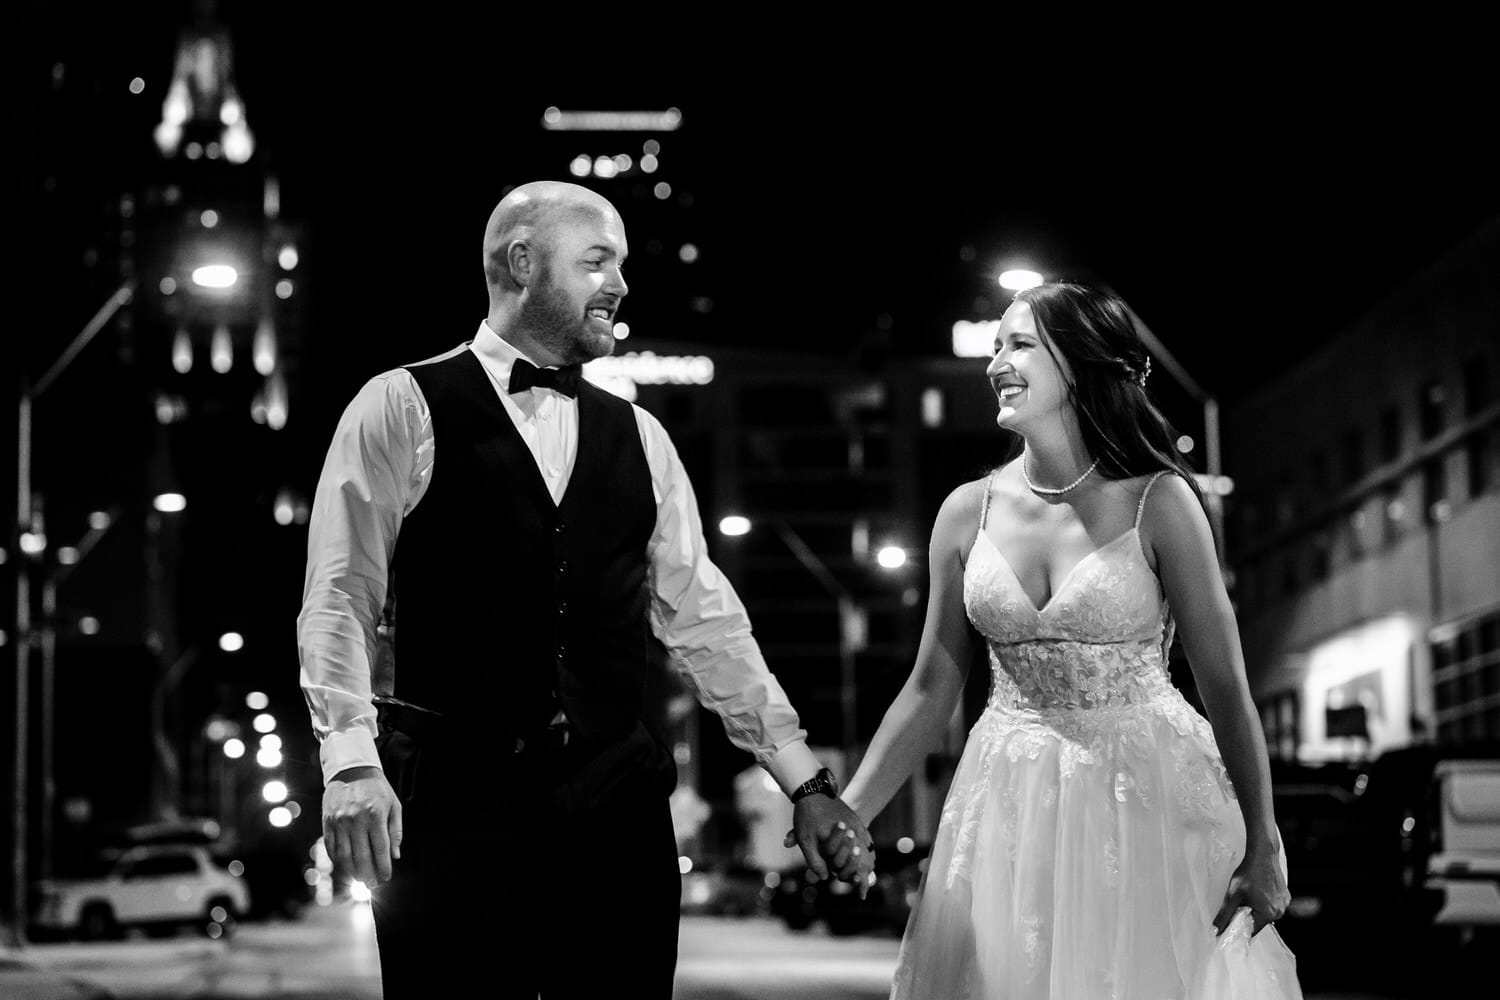 A candid black and white picture of a bride and groom holding hands, walking down a city street, the Kansas City skyline visible behind them on their wedding day. 